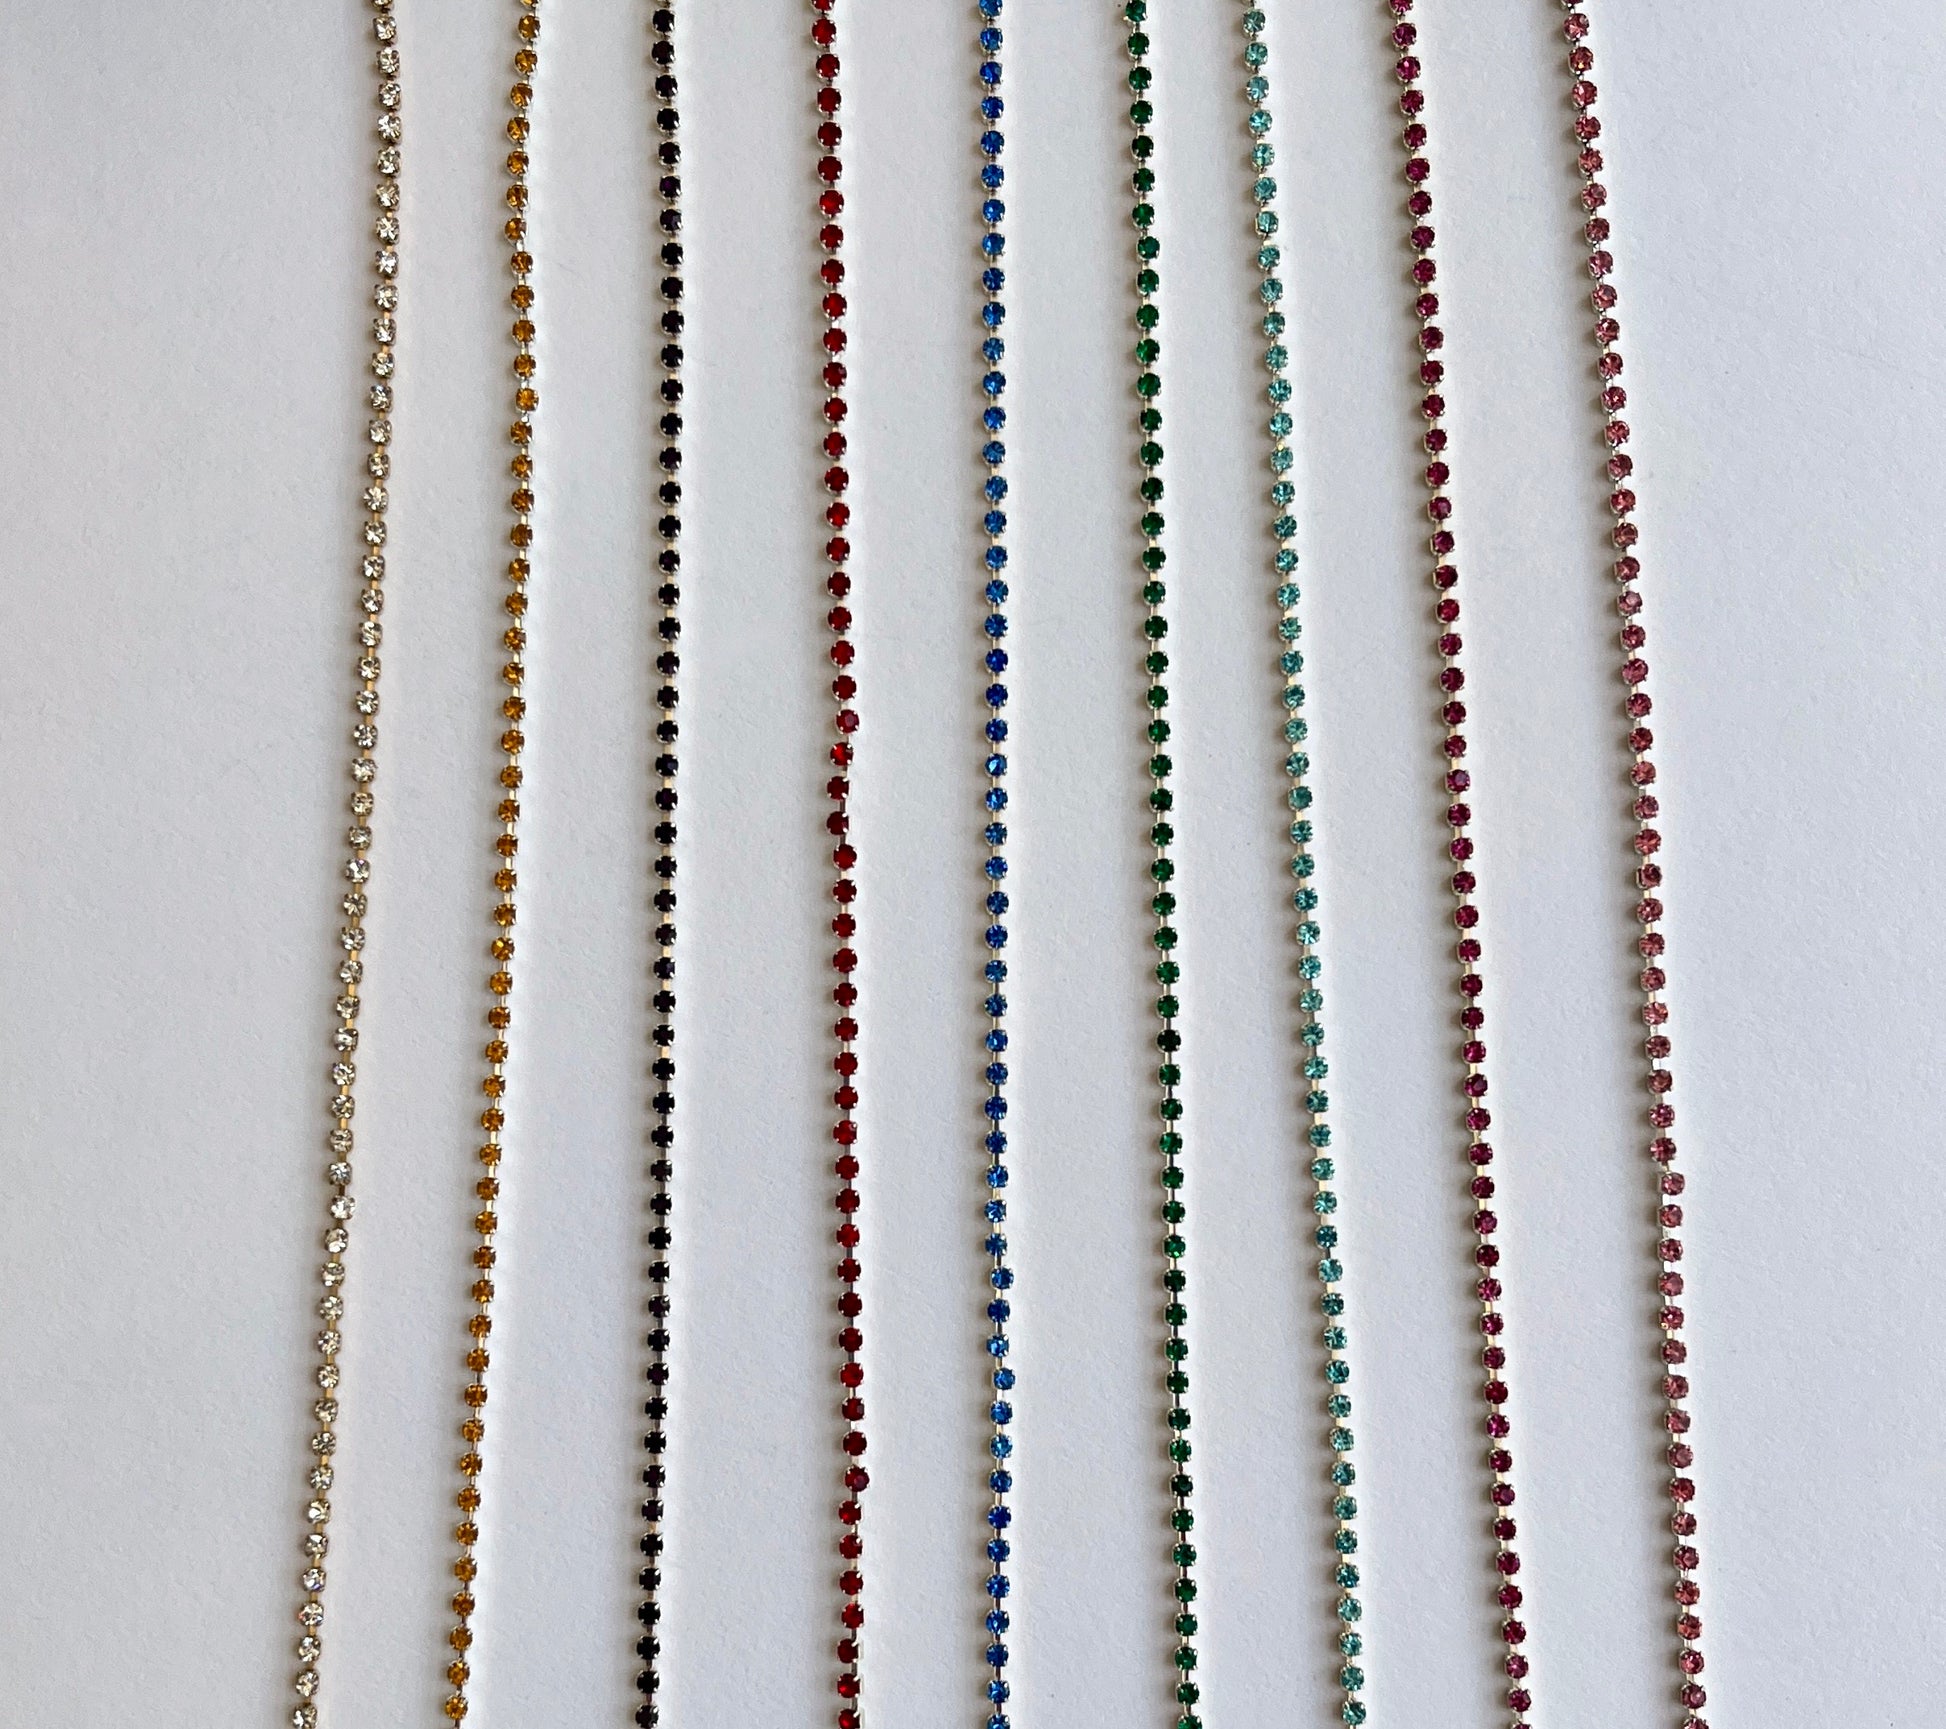 Delicate rhinsteone trim - premium high grade coloured diamante crystals set in a flexible metal chain casing  SOLD BY THE METRE Colours: gold-clear crystal, silver-saffron, silver-Amethyst (dark purple), silver-red, silver-sapphire, silver-emerald, silver-aqua, silver-fuchsia, silver-rose Approx Overall Width: 3mm (⅛”) Stone Size: SS4.5